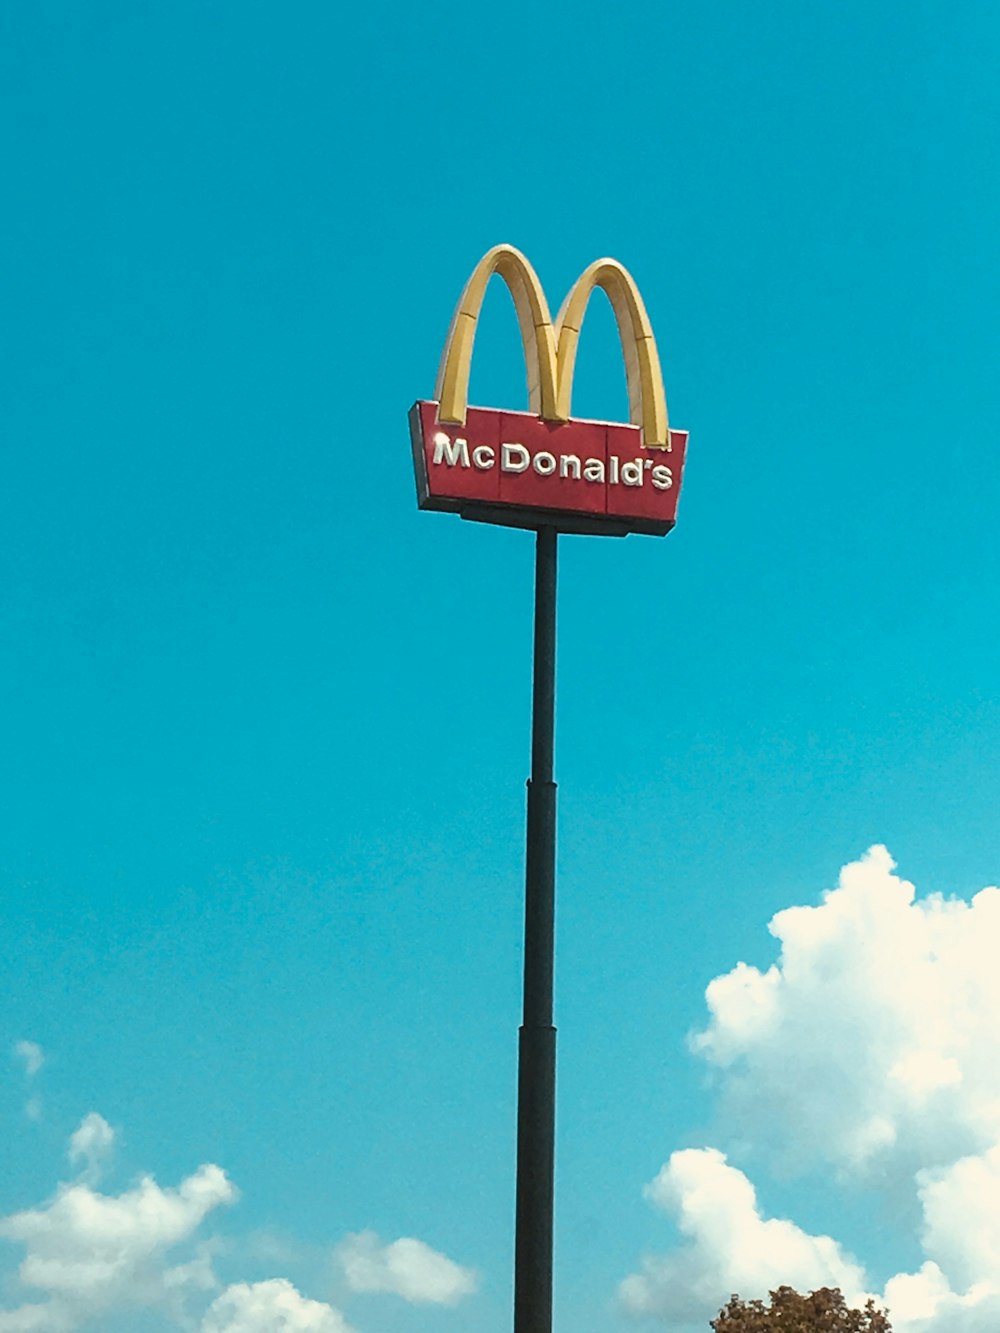 a mcdonald's restaurant sign in front of a blue sky